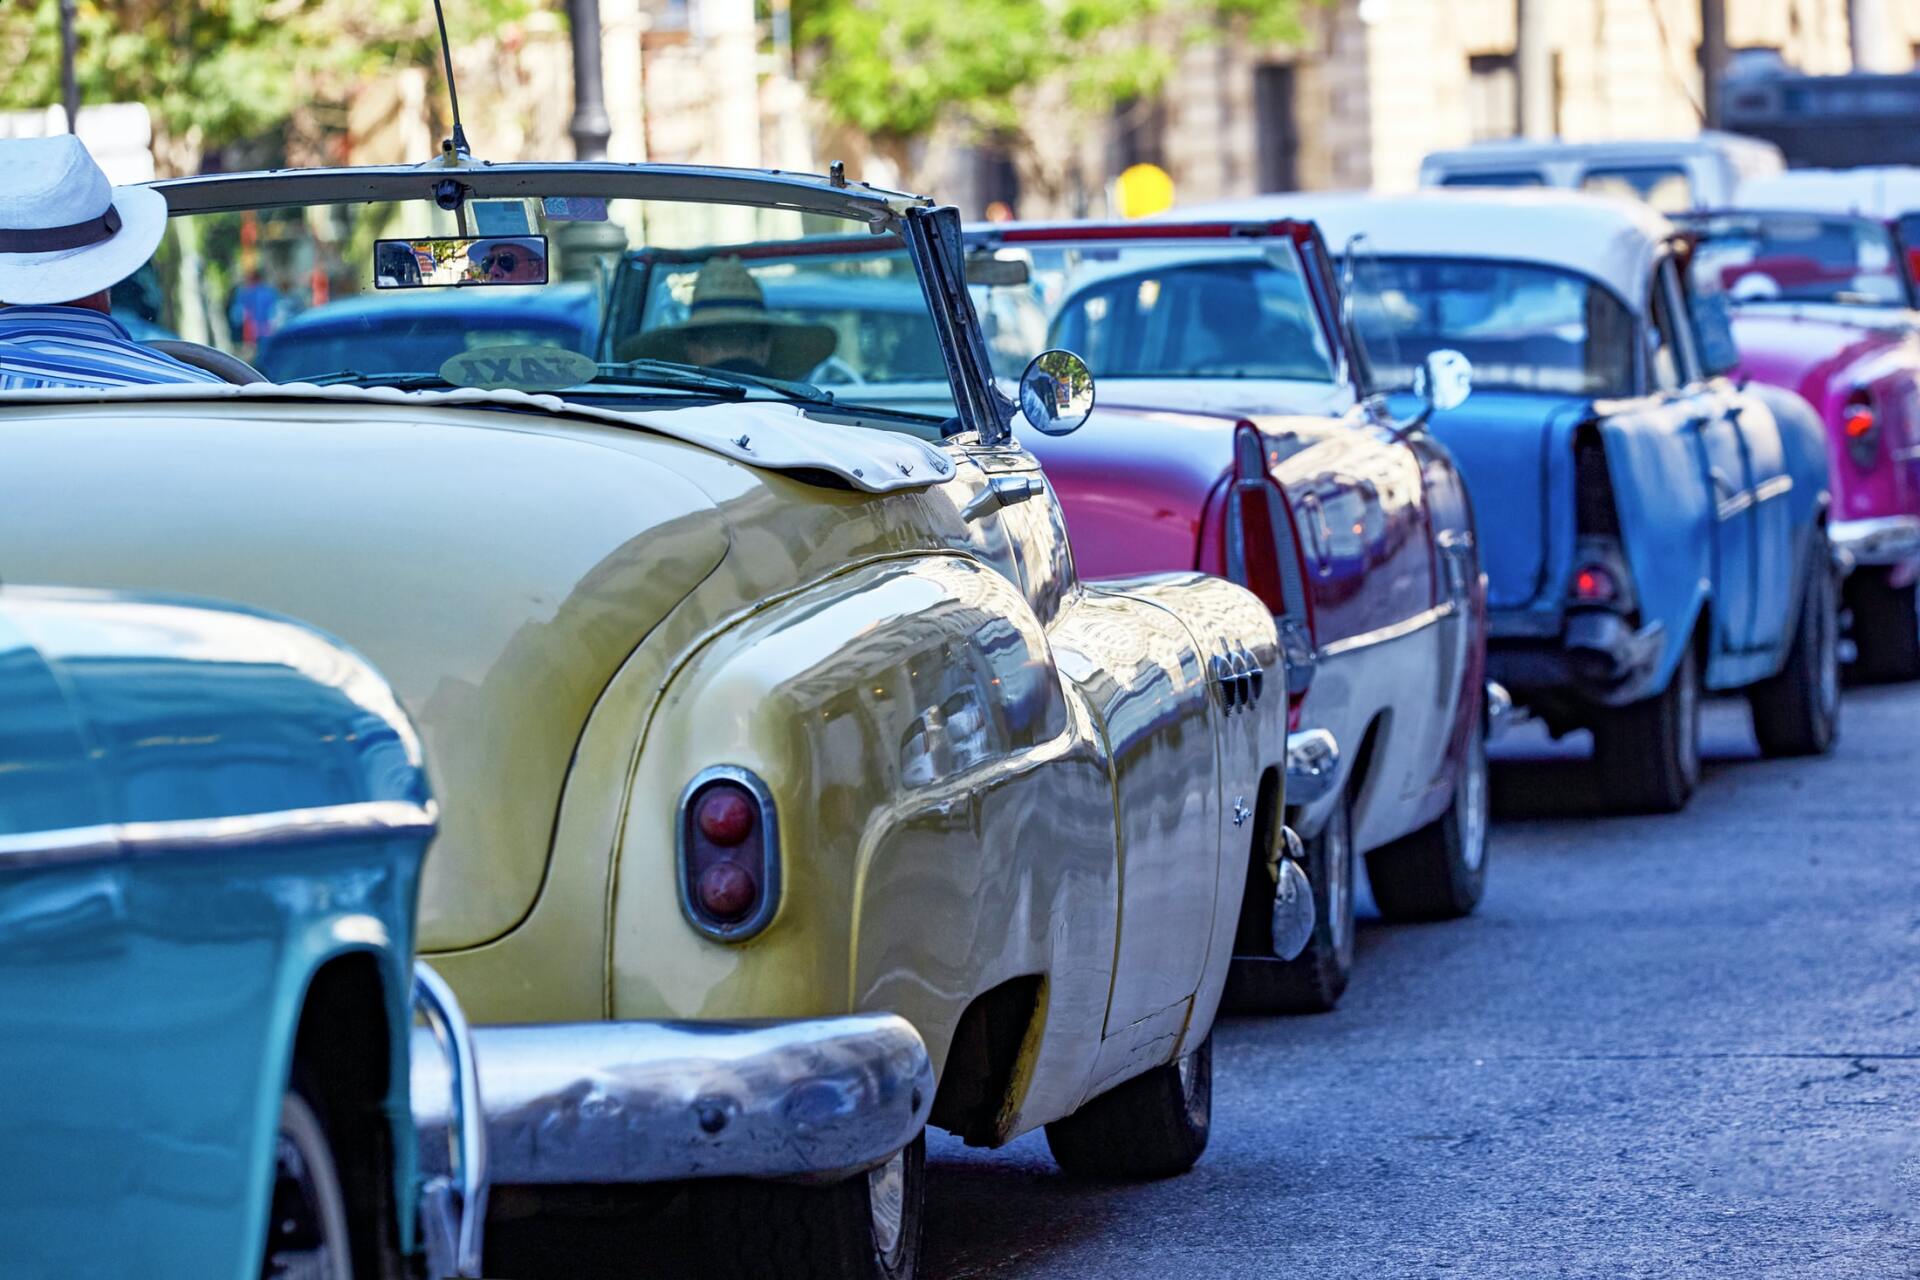 Classic Vehicles Lined Up